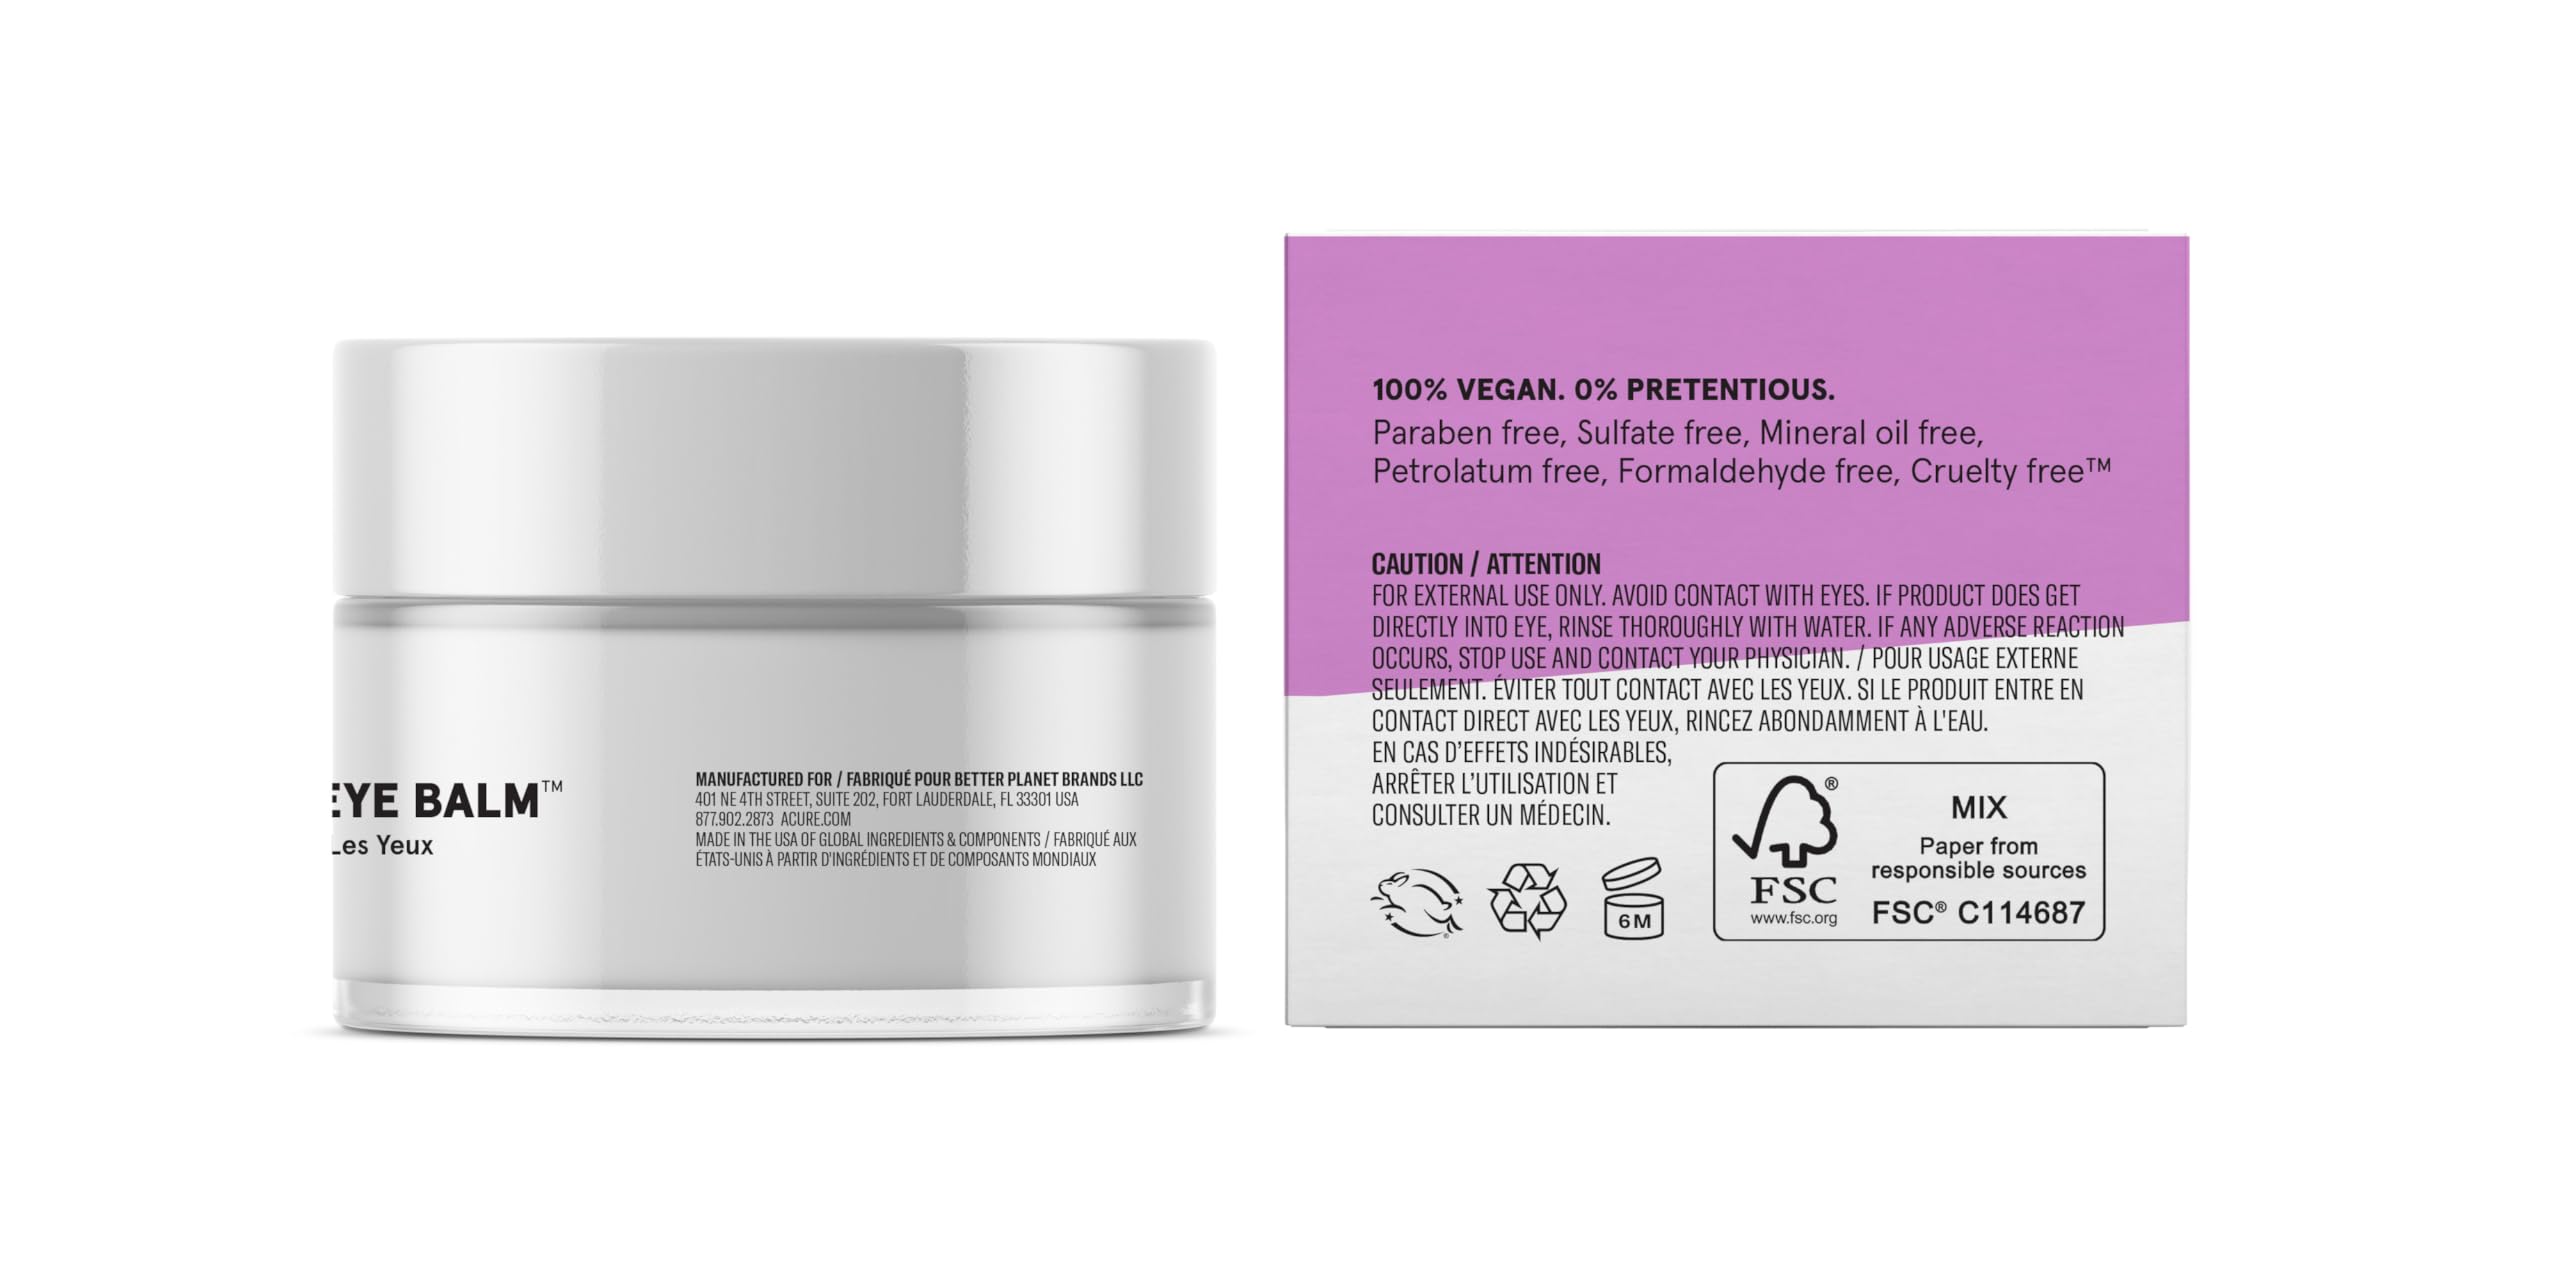 Acure Resilience Eye Balm, Visibly Firm, Brighten & Hydrate With Retinol Eye Balm, 0.5 Oz